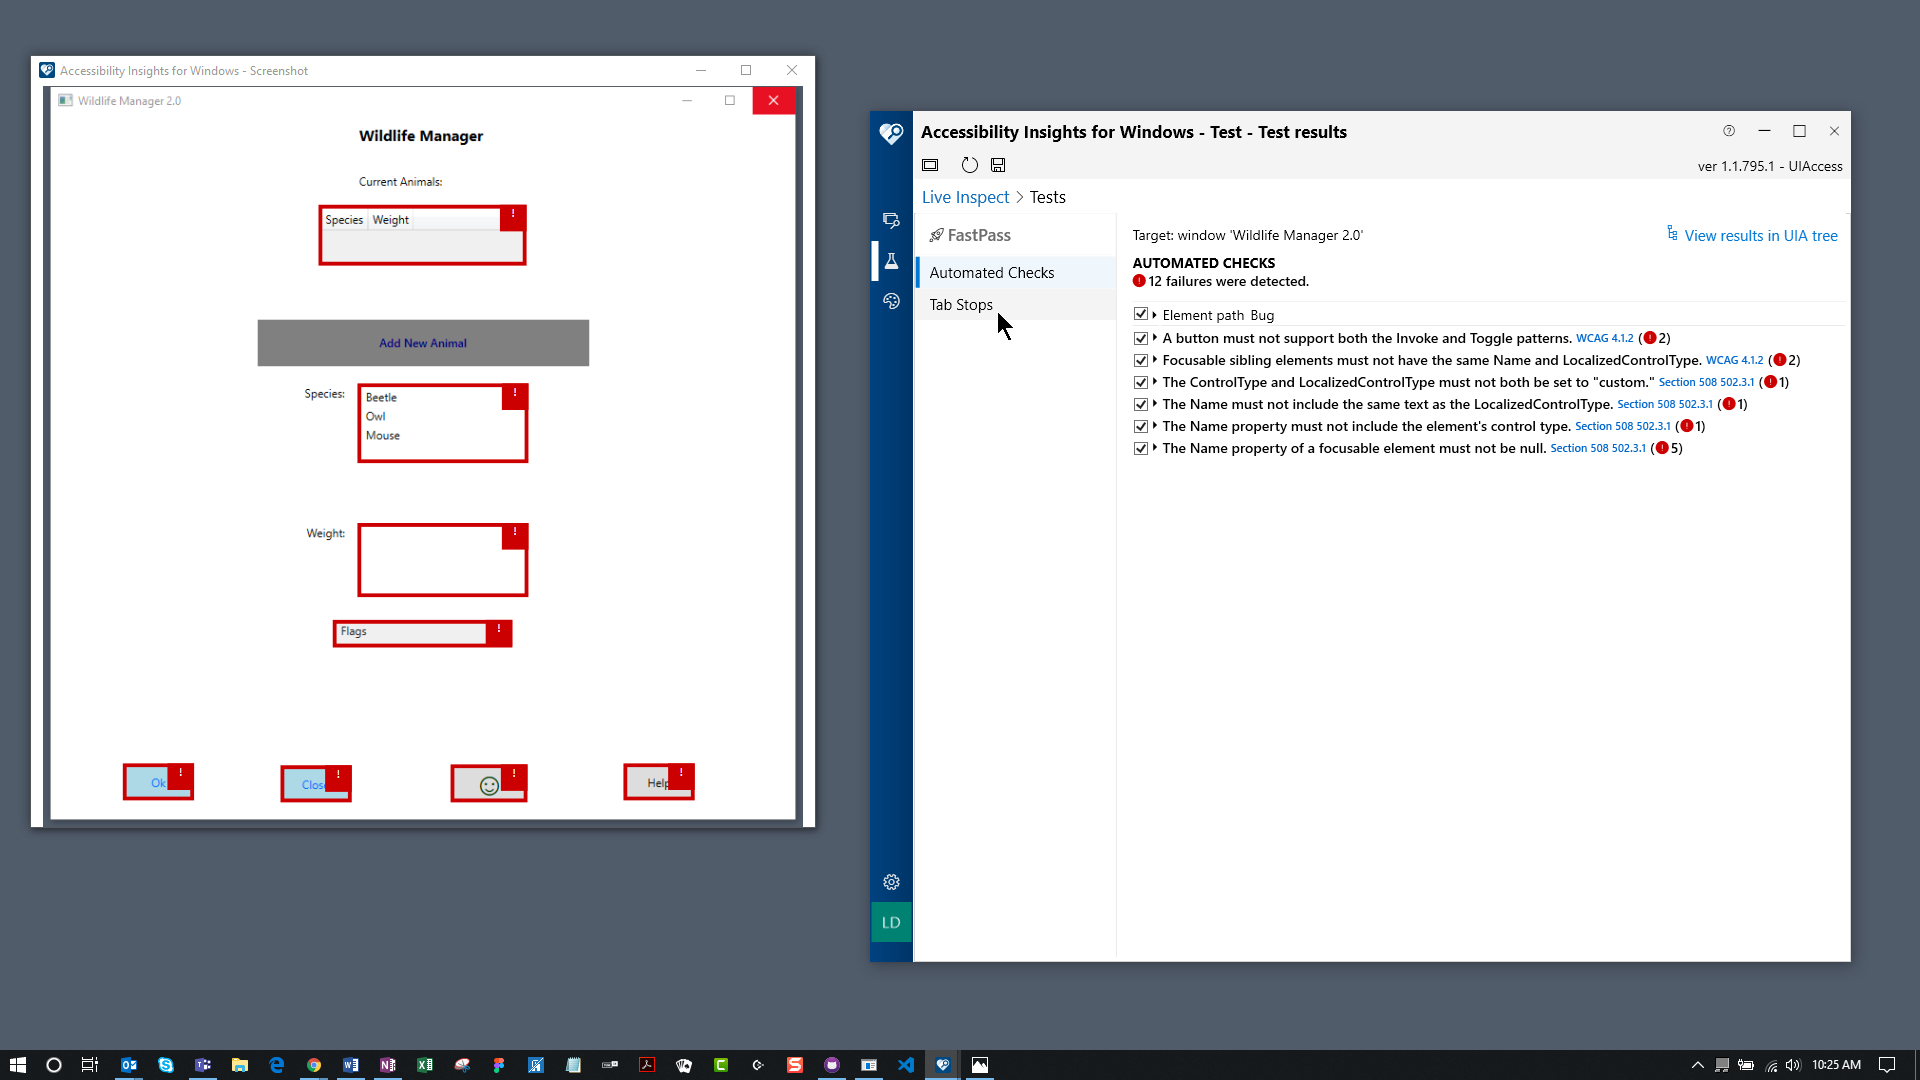 Screenshot showing the Tab Stops test in Accessibility Insights for Windows